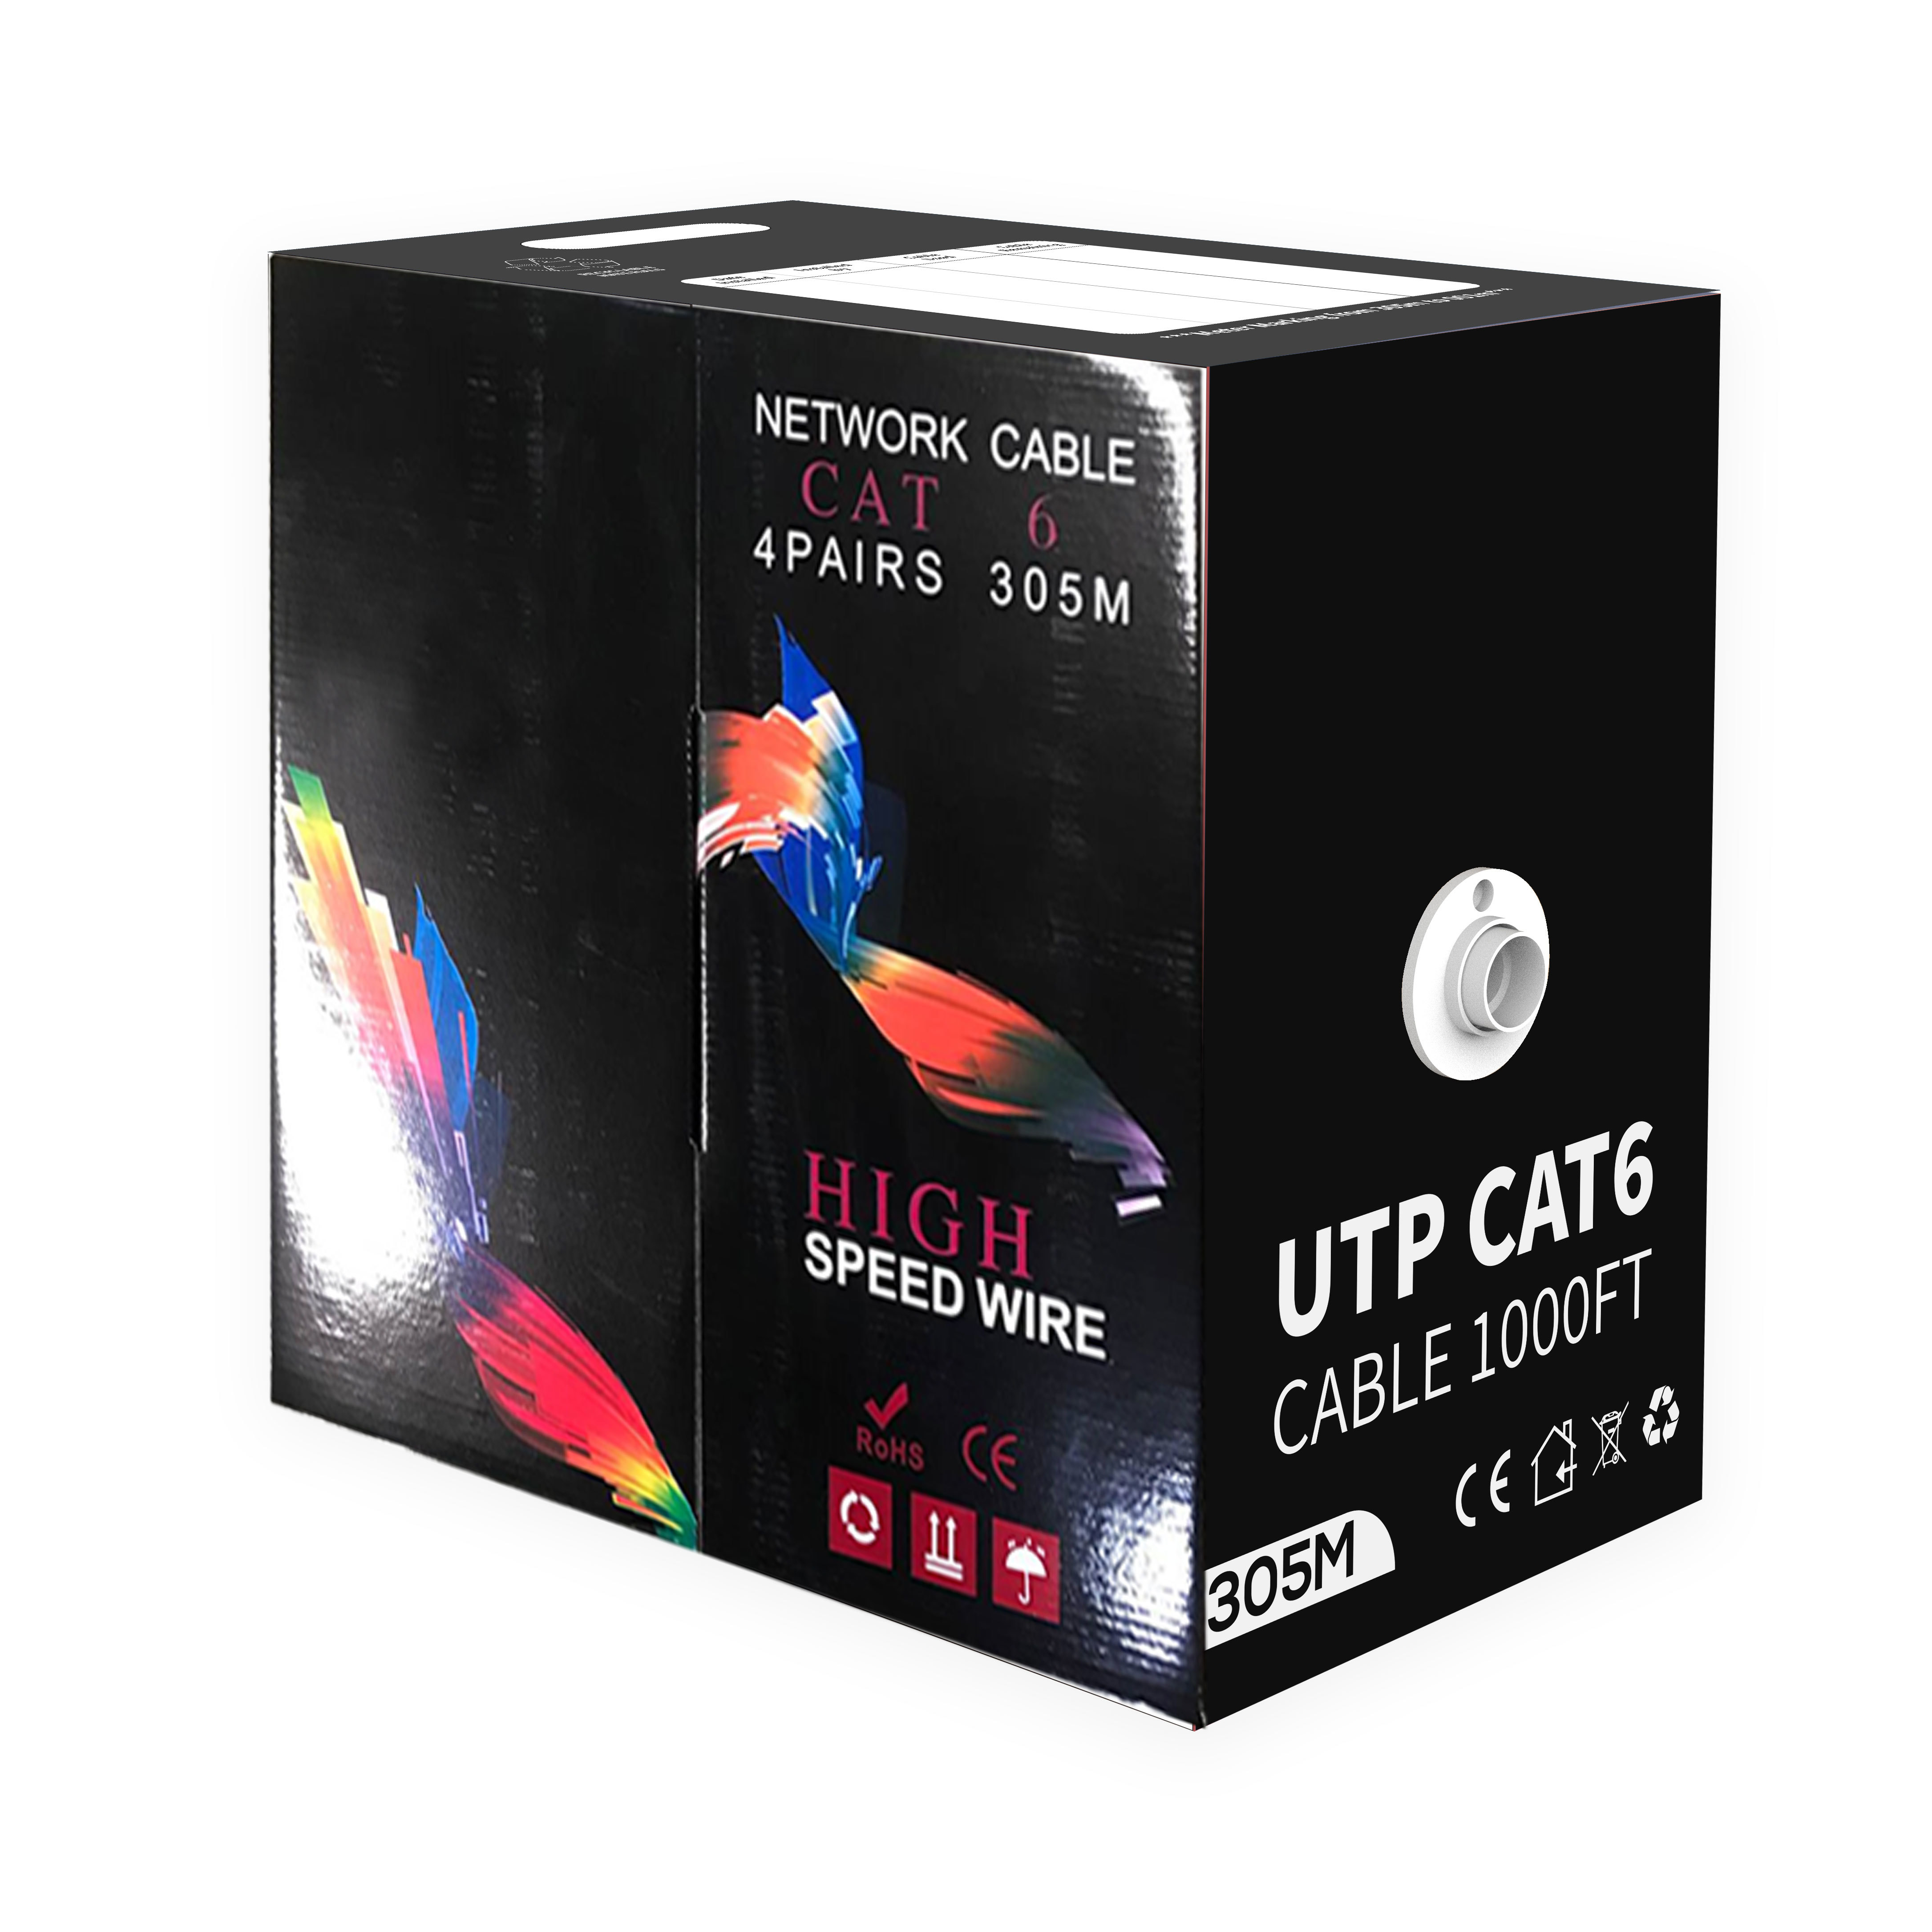 UL CE cat5/6/7/8 network cable